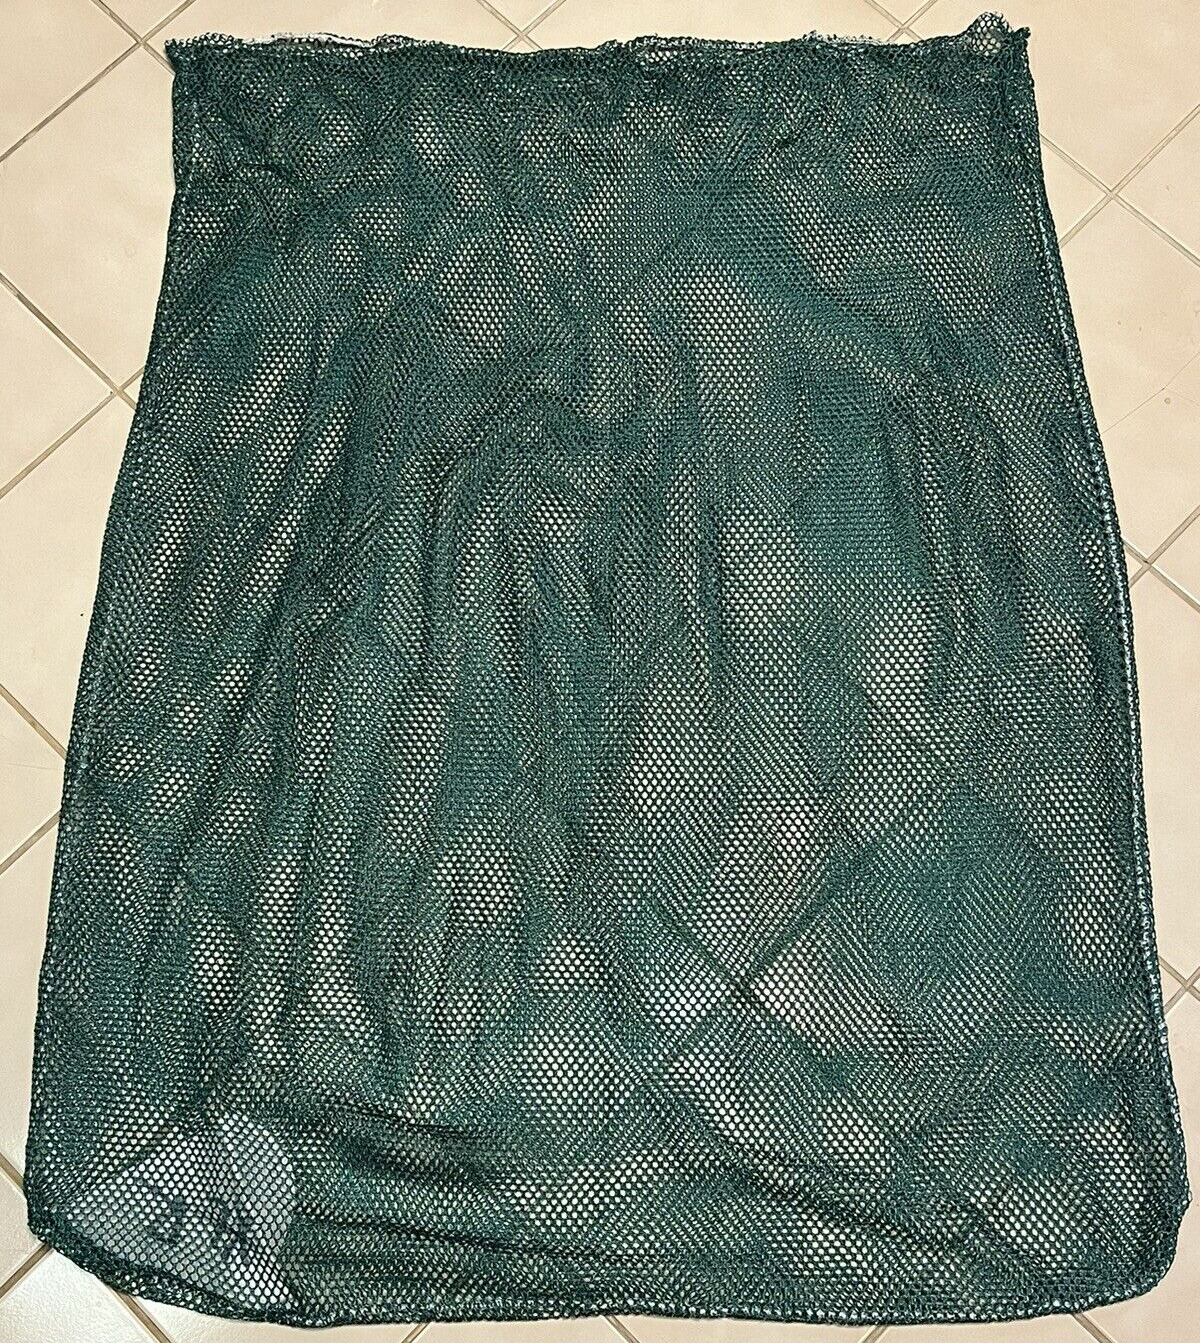 US Military Laundry Bag Mesh Green Laundry Bag Supply 35” X 28” Authentic Large